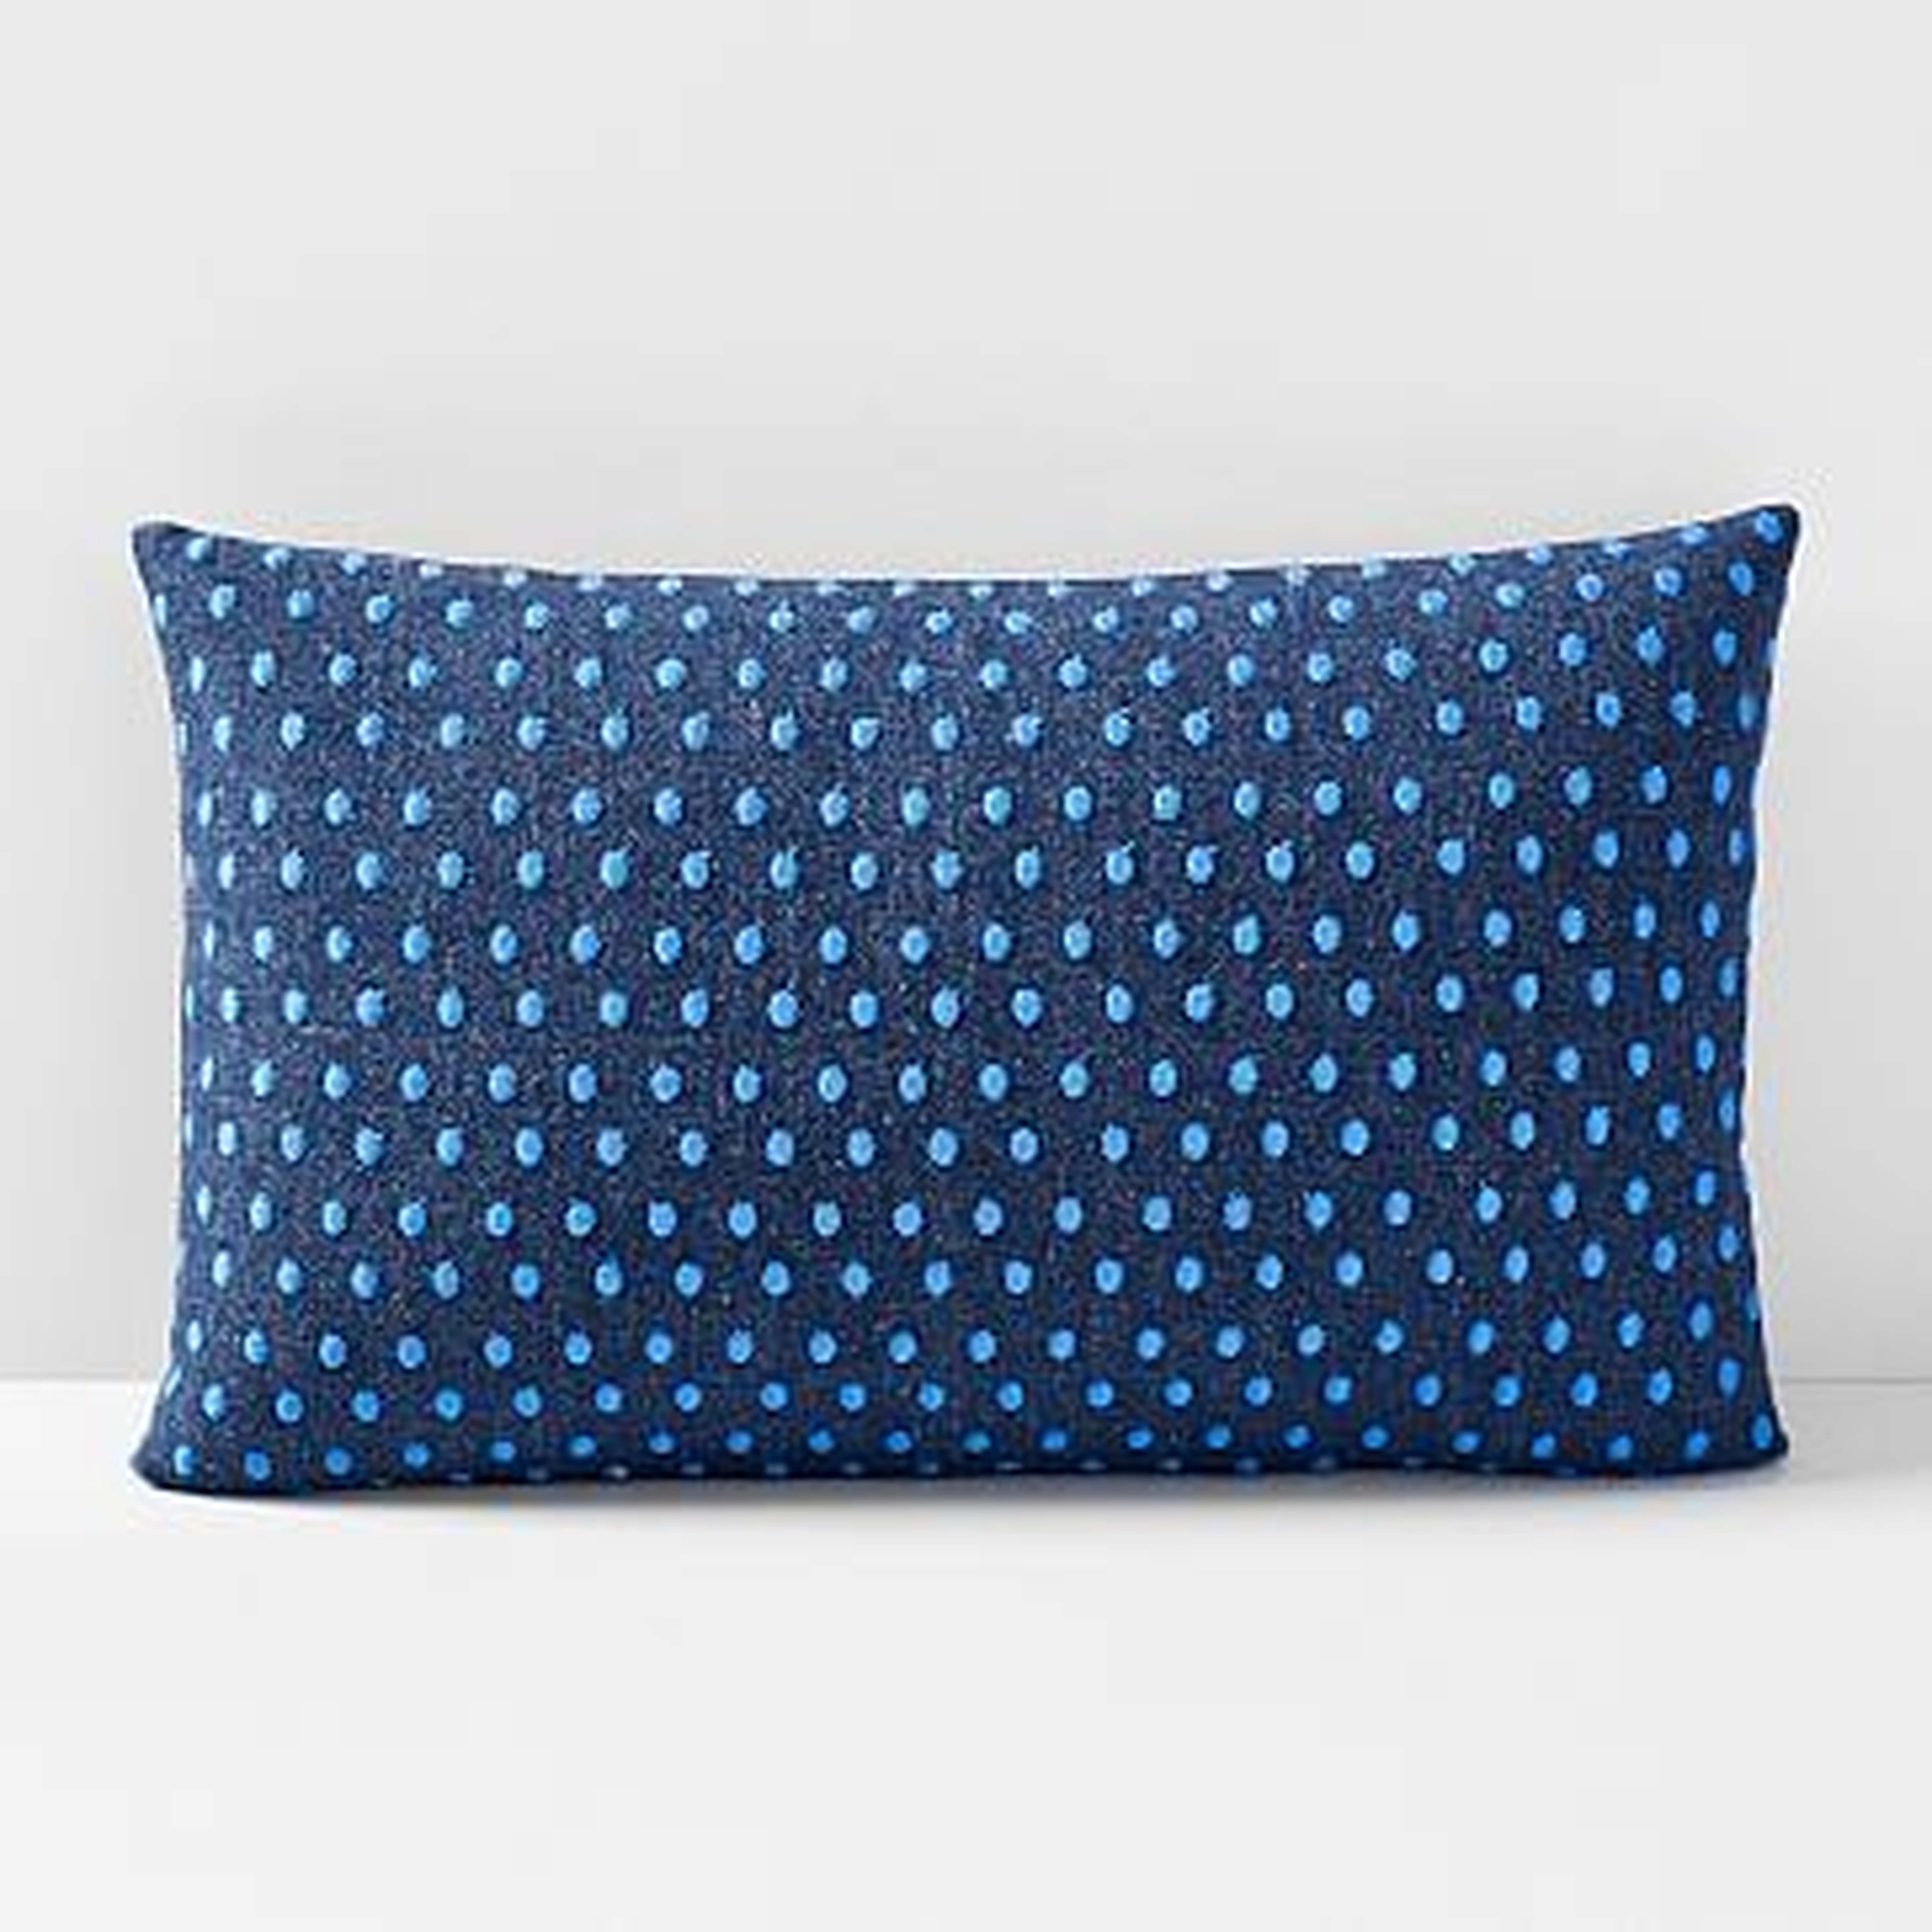 Embroidered Dot Pillow Cover, 12"x21", Midnight - West Elm